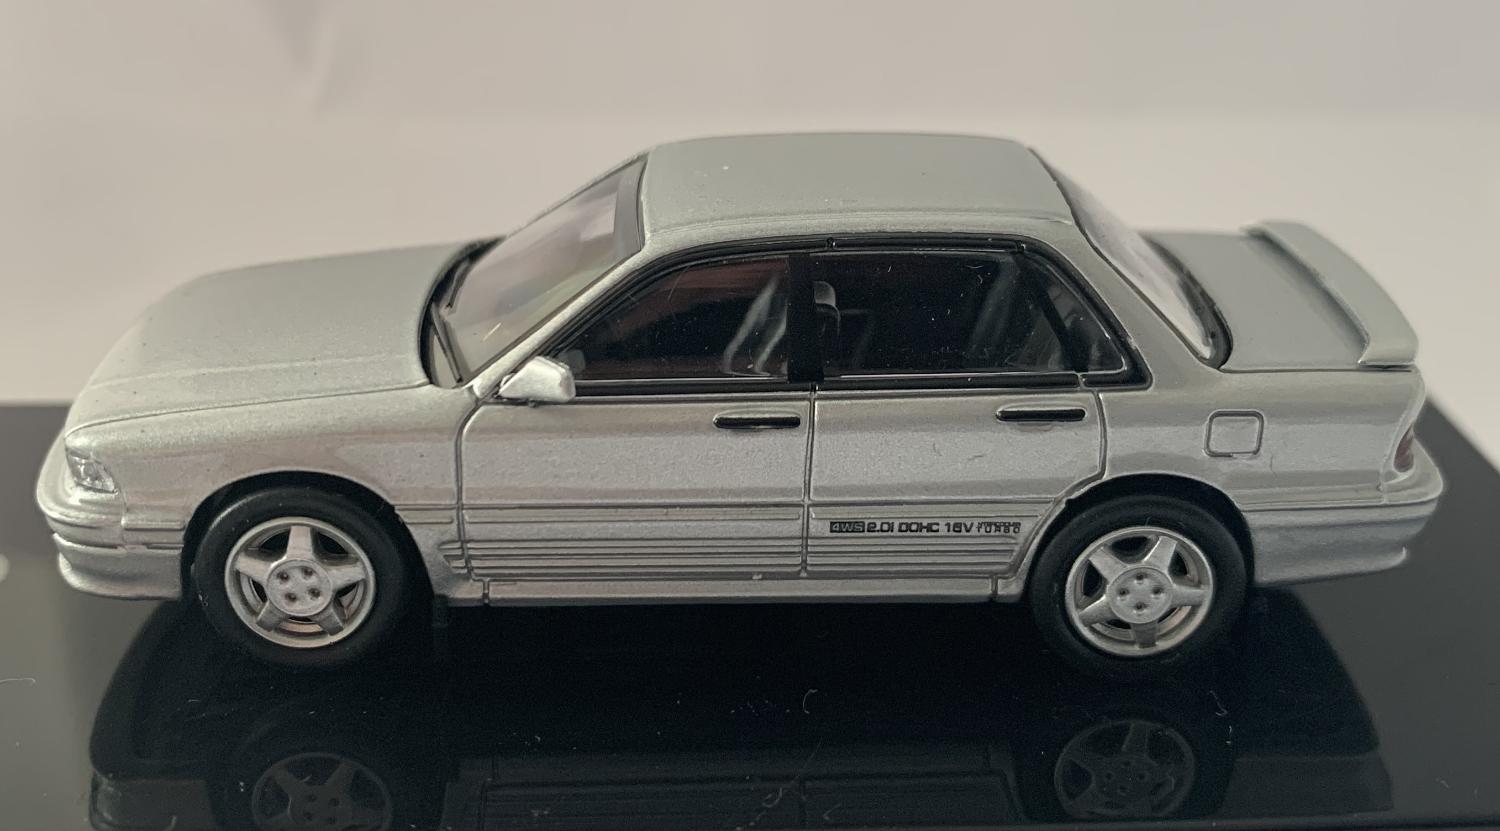 scale diecast models of Mitsubishi cars